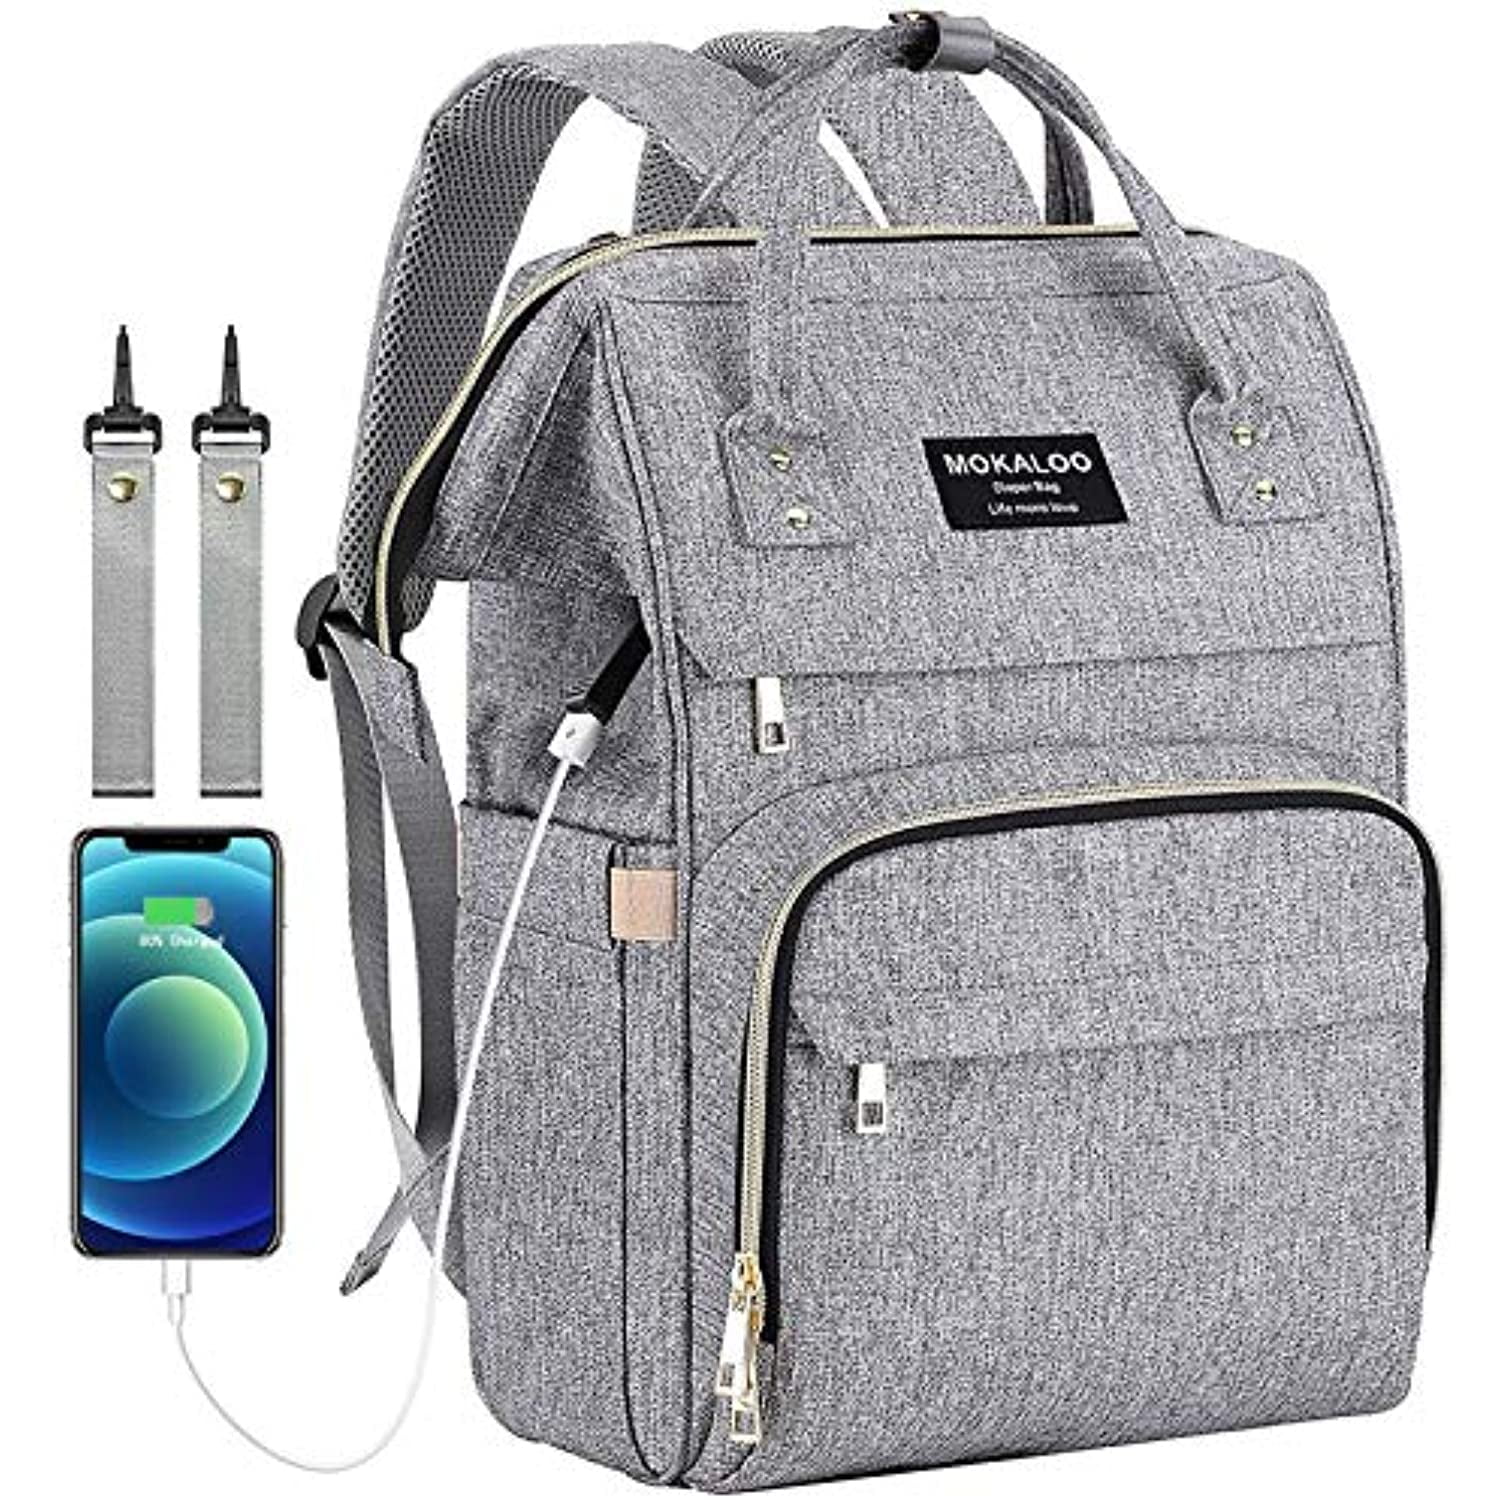 Multifunction Nappy Backpack Diaper Bag Maternity Baby Care Changing Pad Travel Compartment Back Pack with Thermal Insulated Bottle Pockets Stroller Straps Waterproof for Mom Dad Large Capacity 